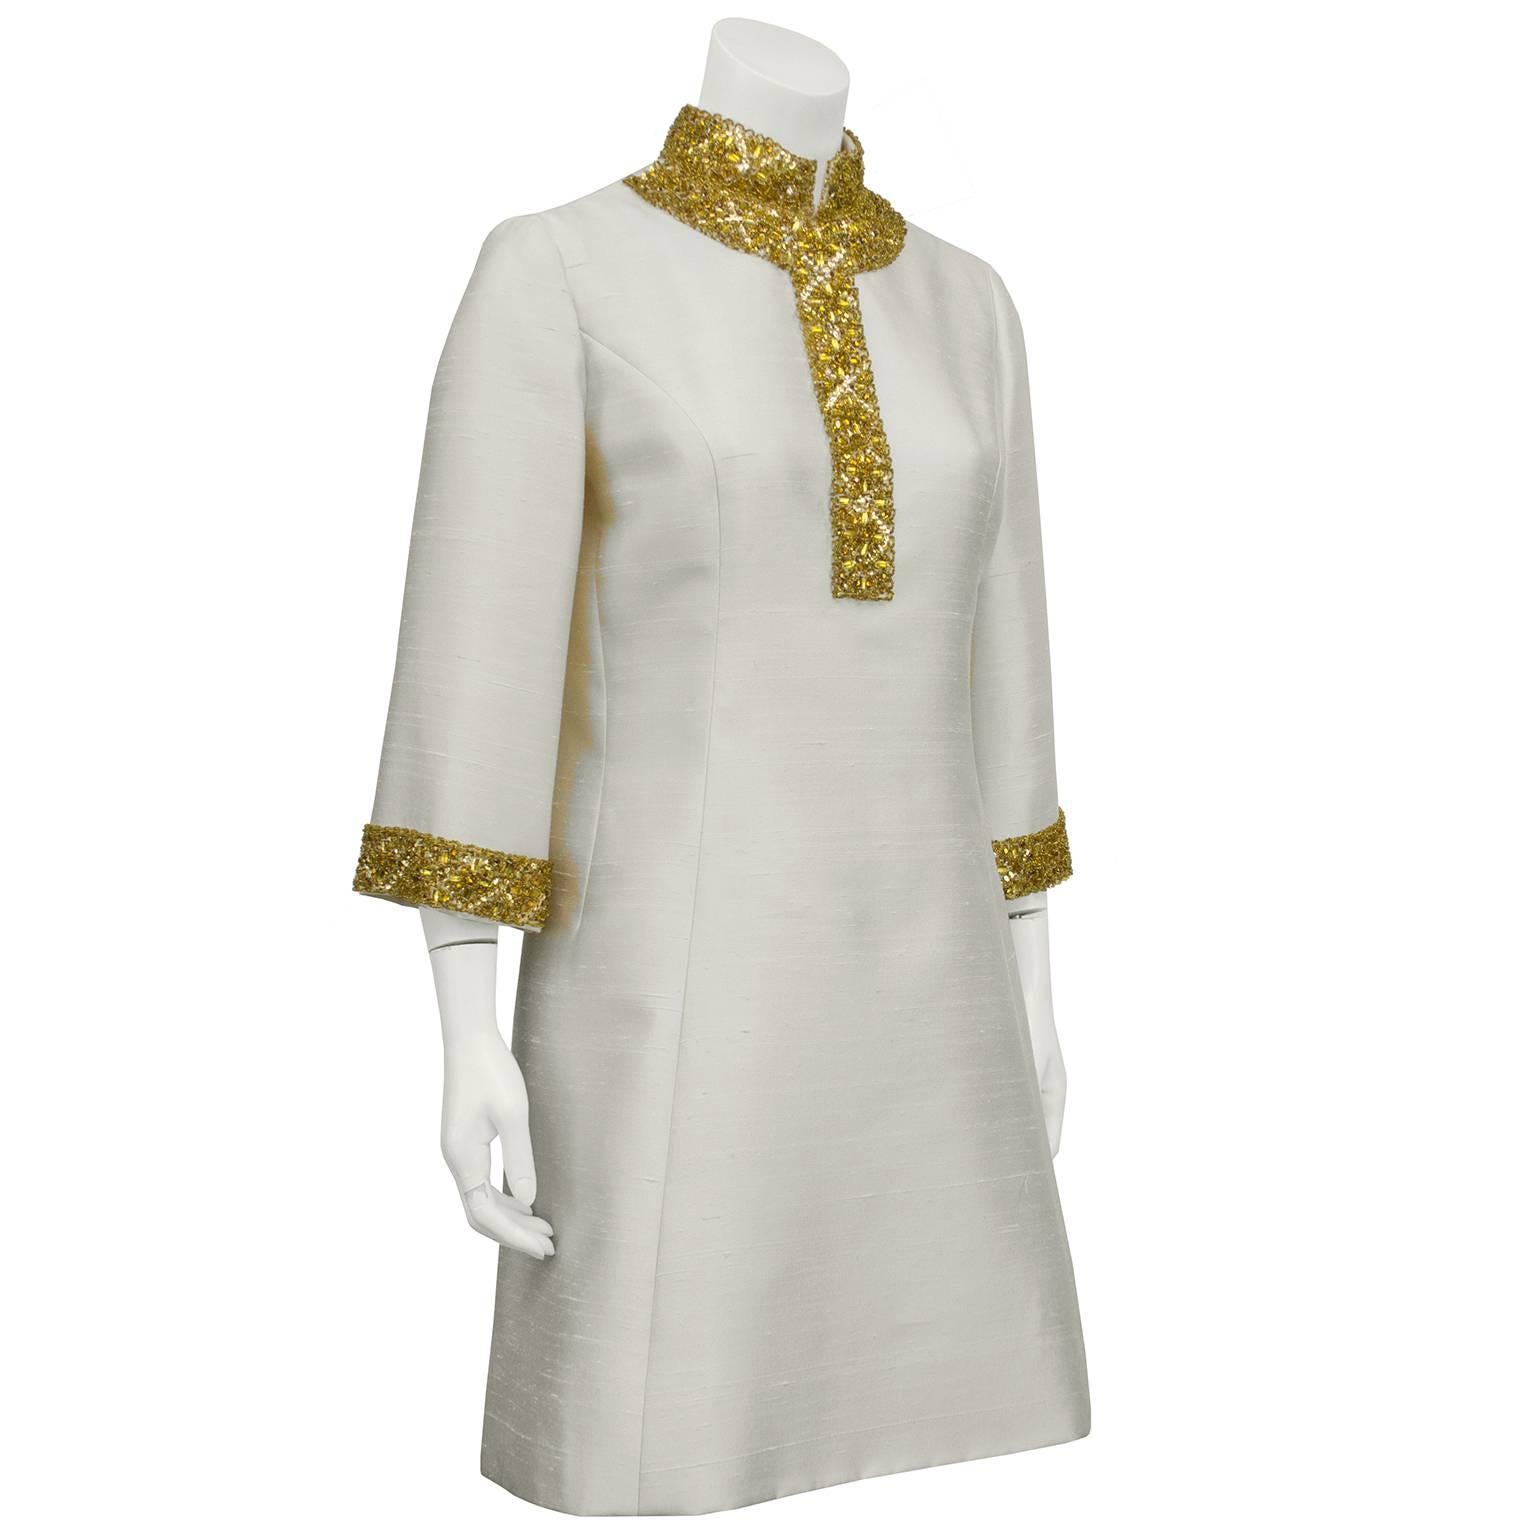 Shaped like an updated and flattering caftan, this 1960s cream raw silk dress has the most beautiful gold beading detail along the neckline and cuffs. Seaming down the side creates a beautiful silhouette and a zipper up the back makes for easy